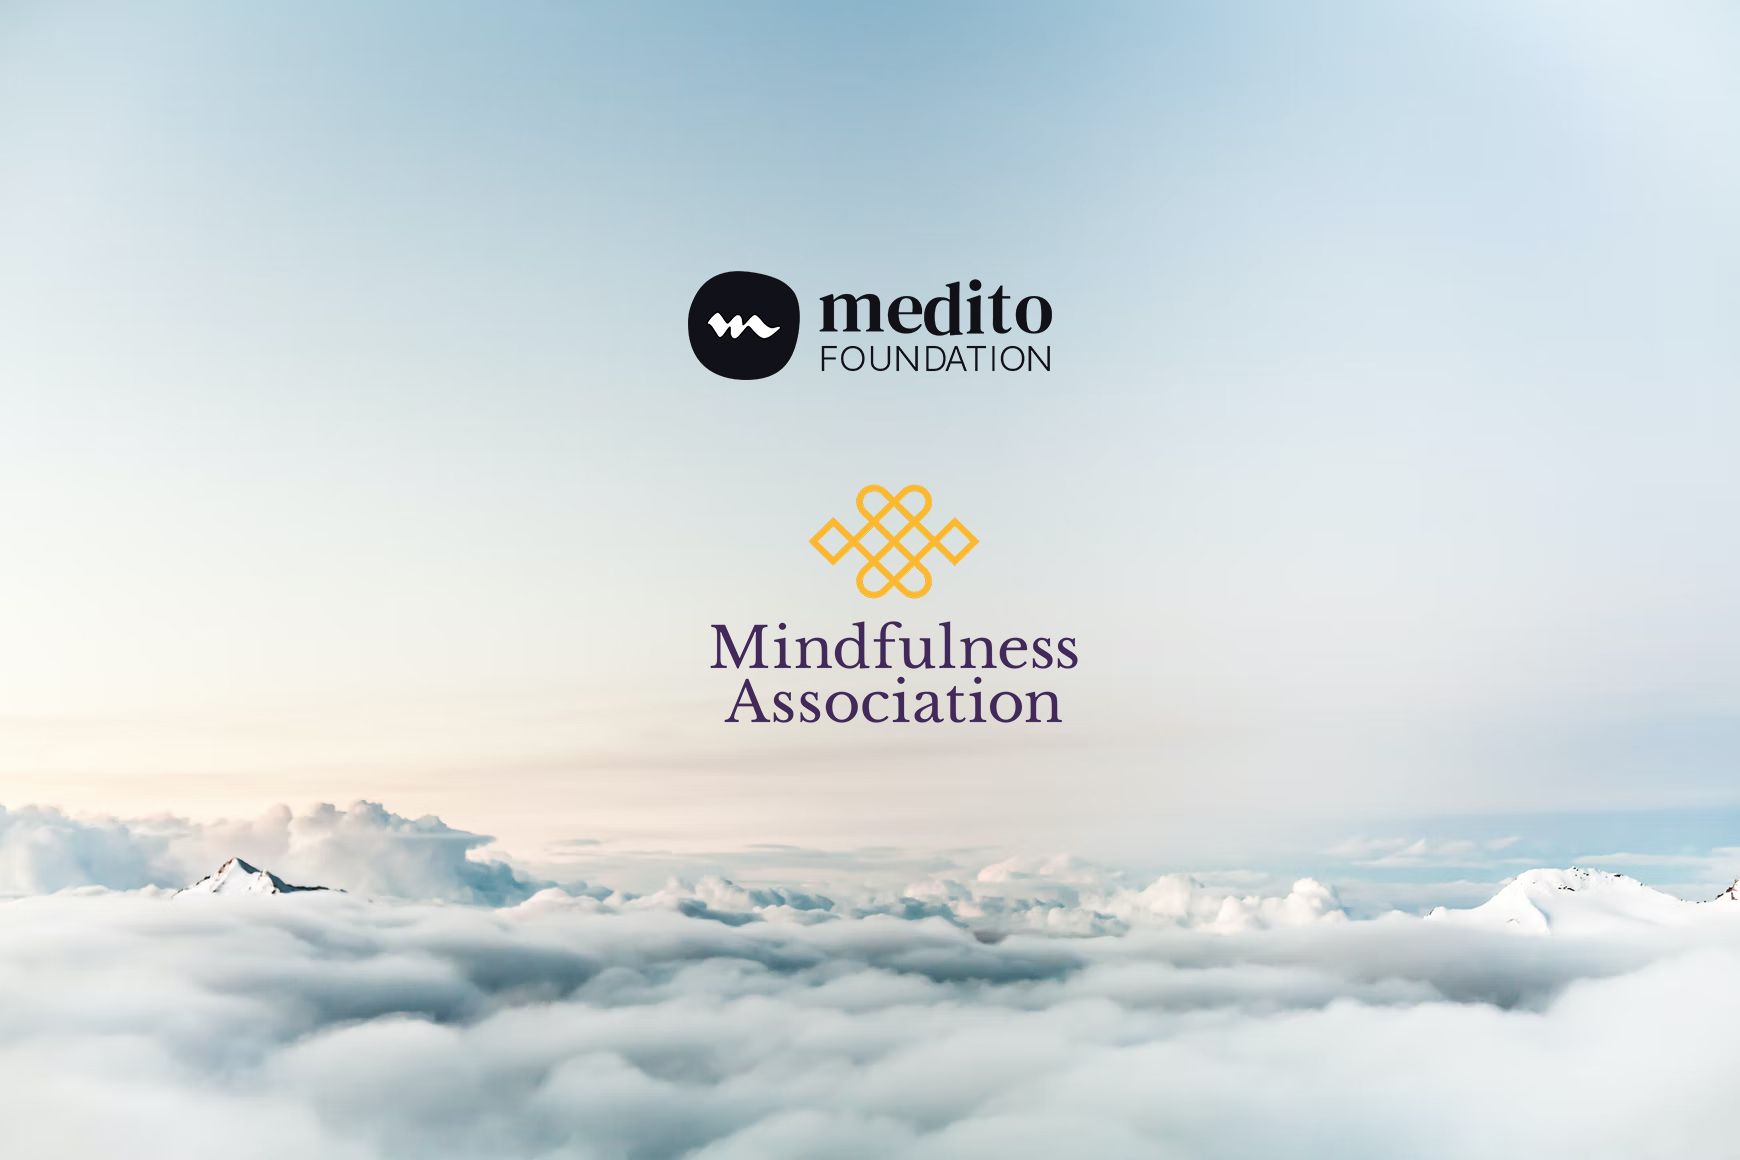 Medito Foundation partners with the Mindfulness Association to deliver even more free mindfulness content